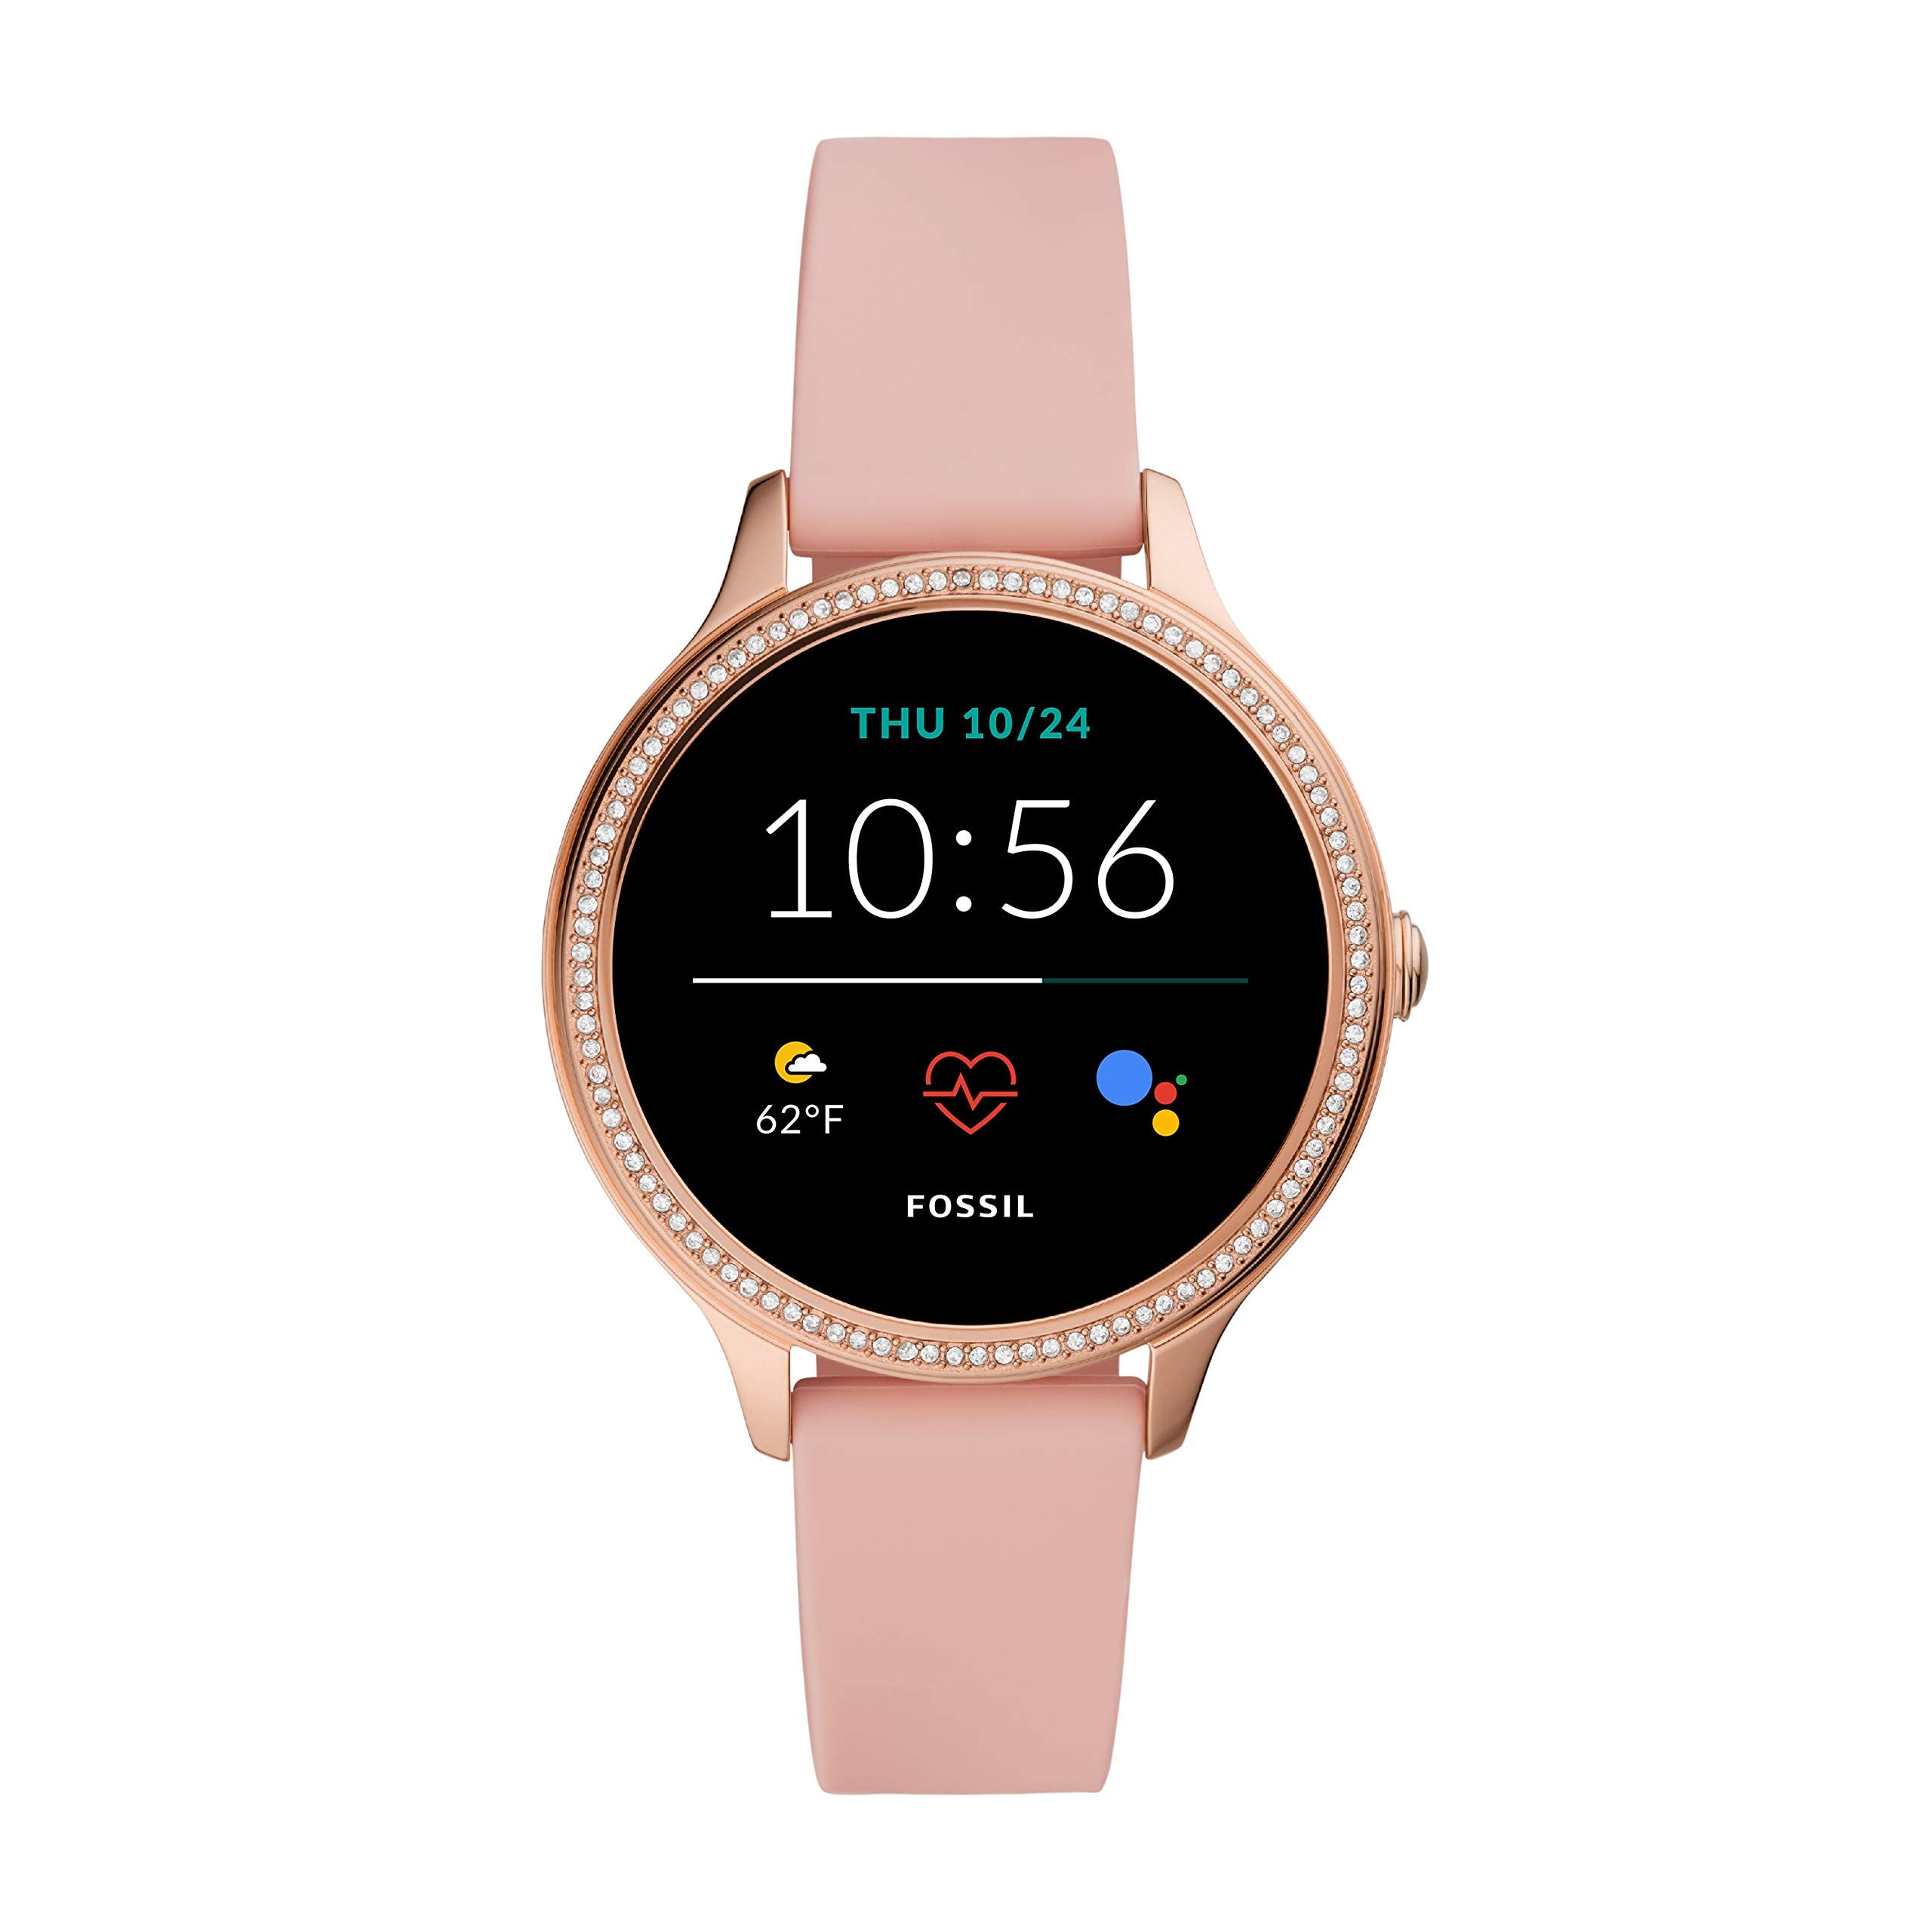 Fossil Women's Gen 5E 42mm Stainless Steel Touchscreen Smartwatch with Alexa, Speaker, Heart Rate, Activity Tracking and Smartphone Notifications